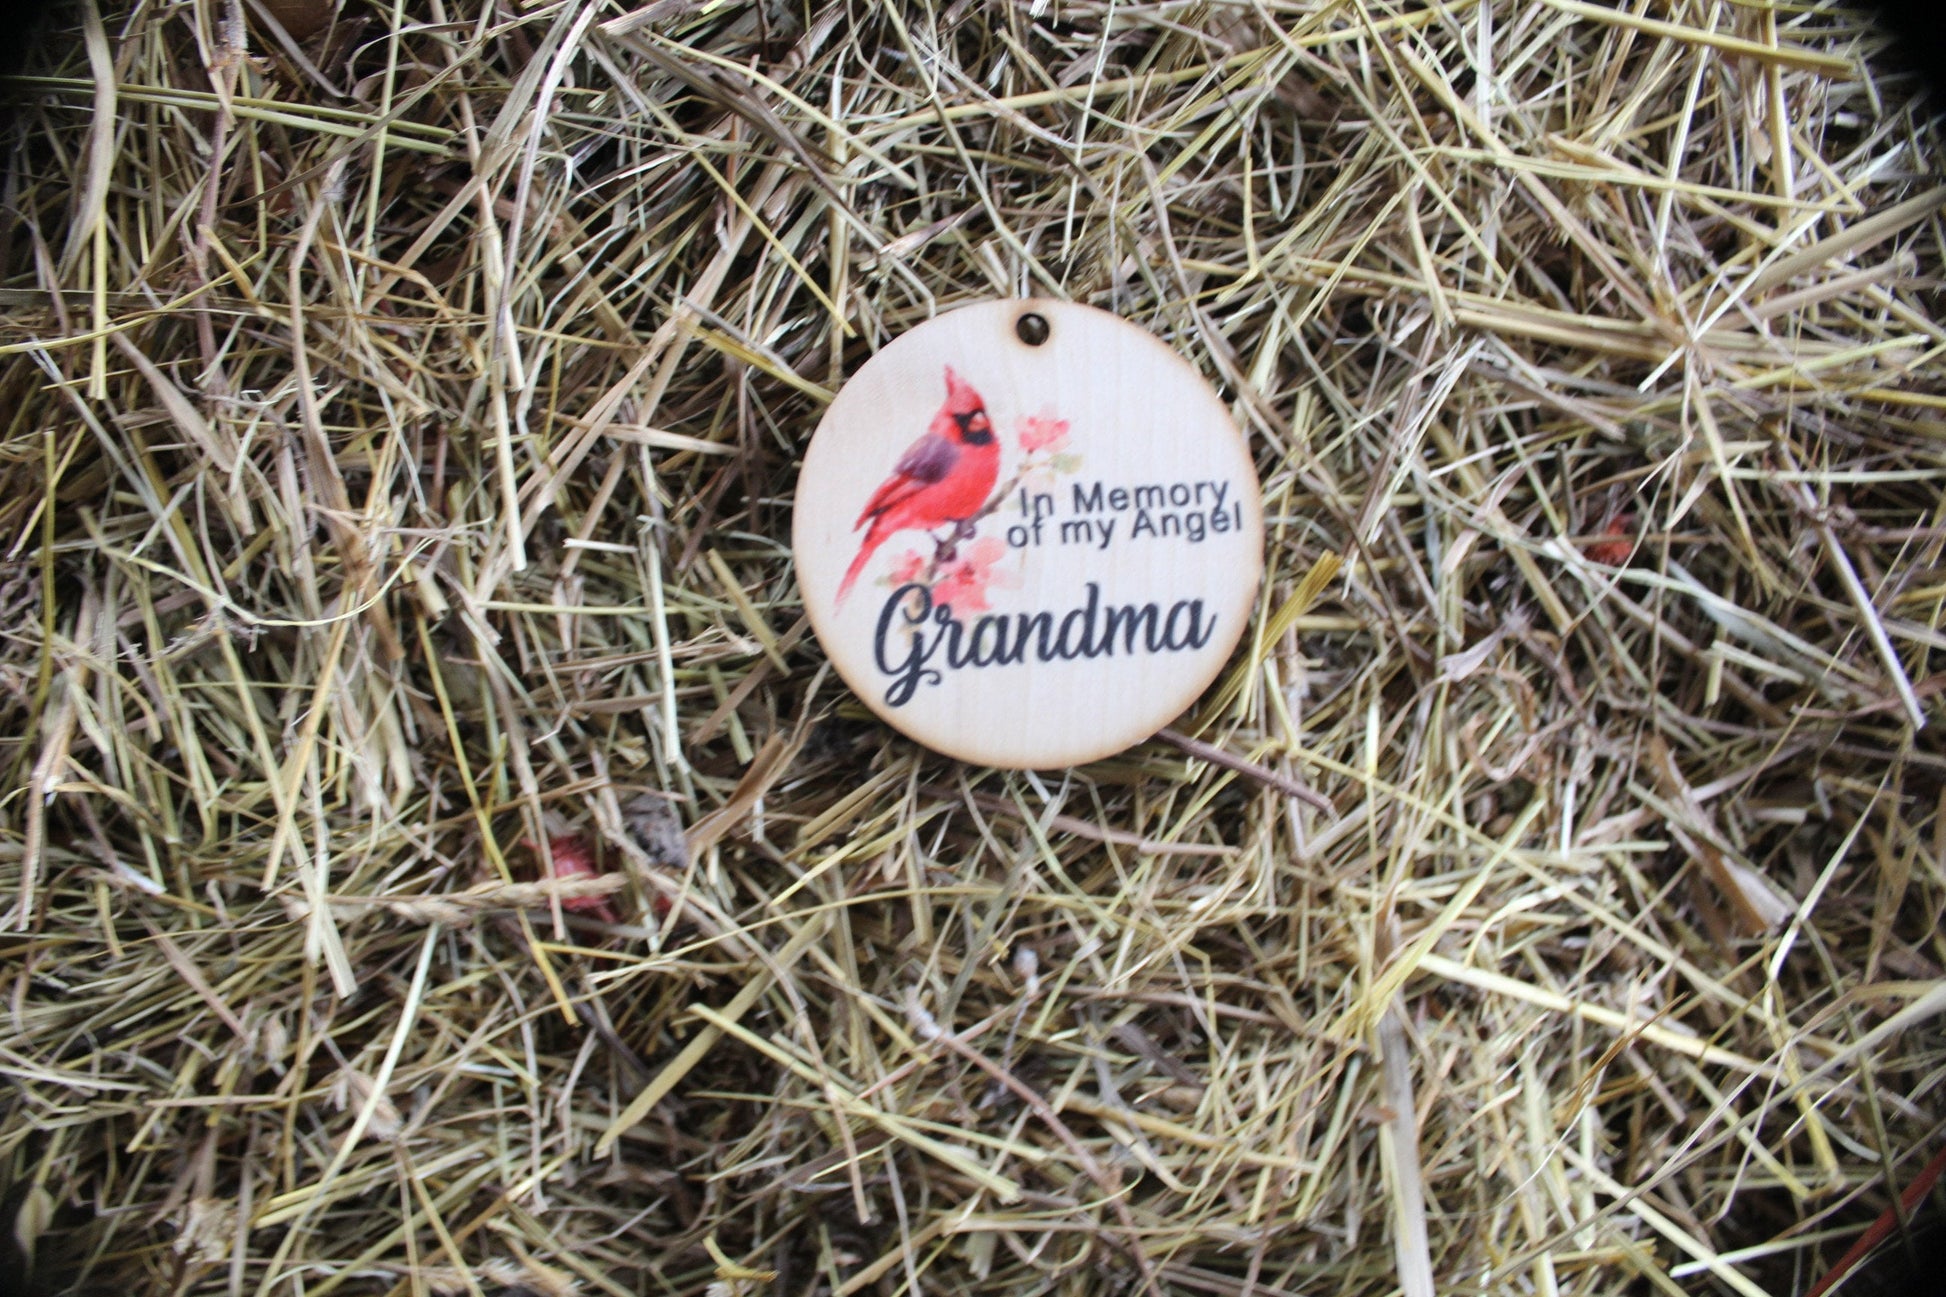 In Memory Of My Angel Grandma Cardnial In Rememberance Memorial Christmas Holiday Ornament Woodslice Keychain Gift Tag Round